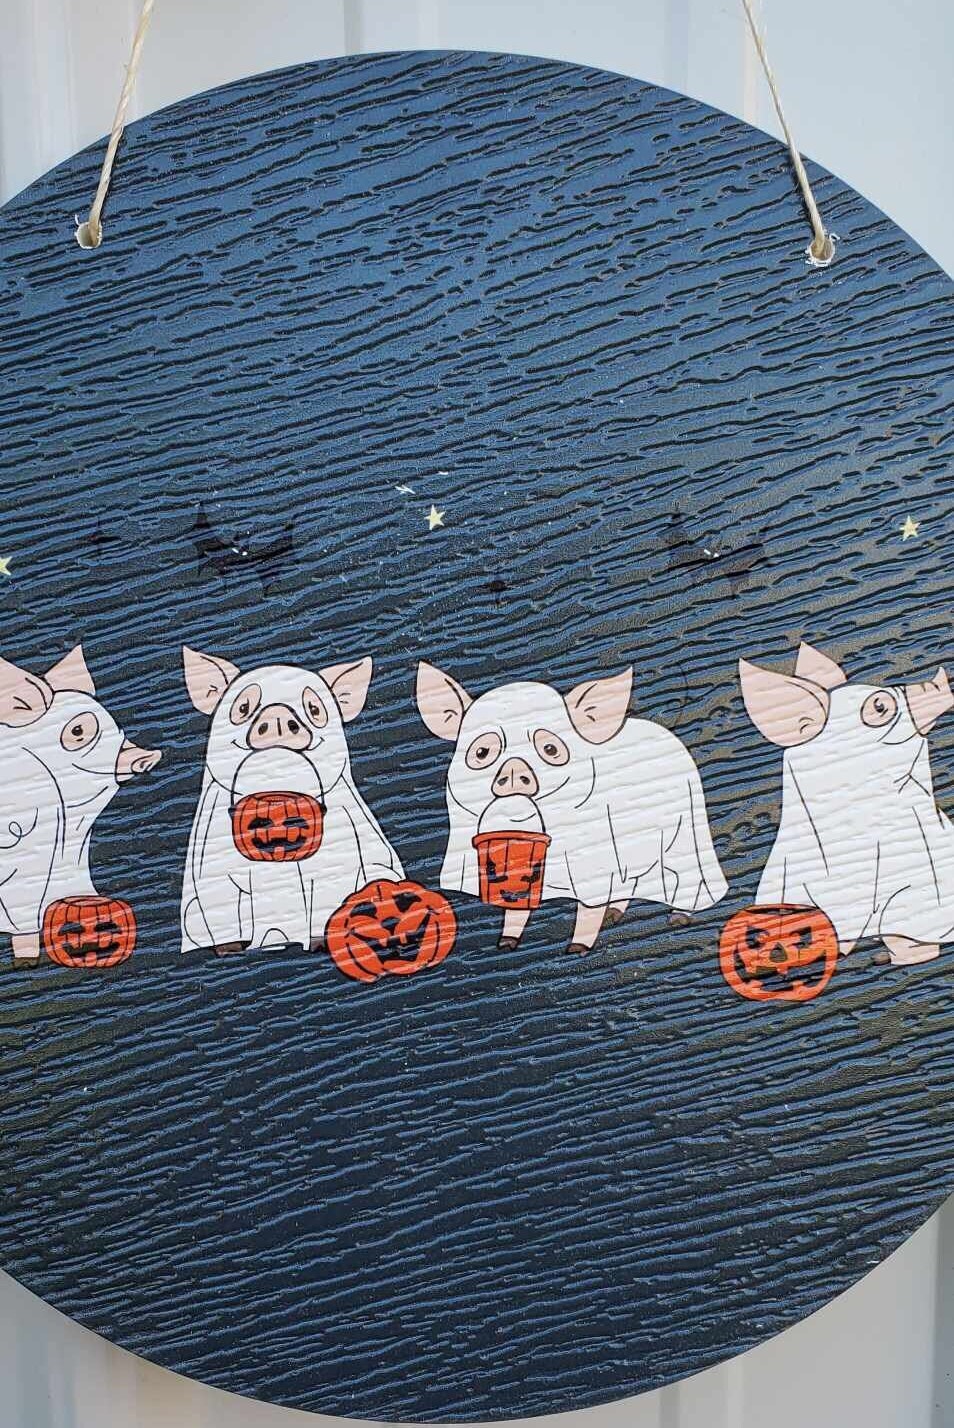 Pigs Piglets Ghost Baby Farm Animals Trick or Treat Halloween Dress Up Fall Autumn PVC Weather Proof Printed Doorhanger Outdoor